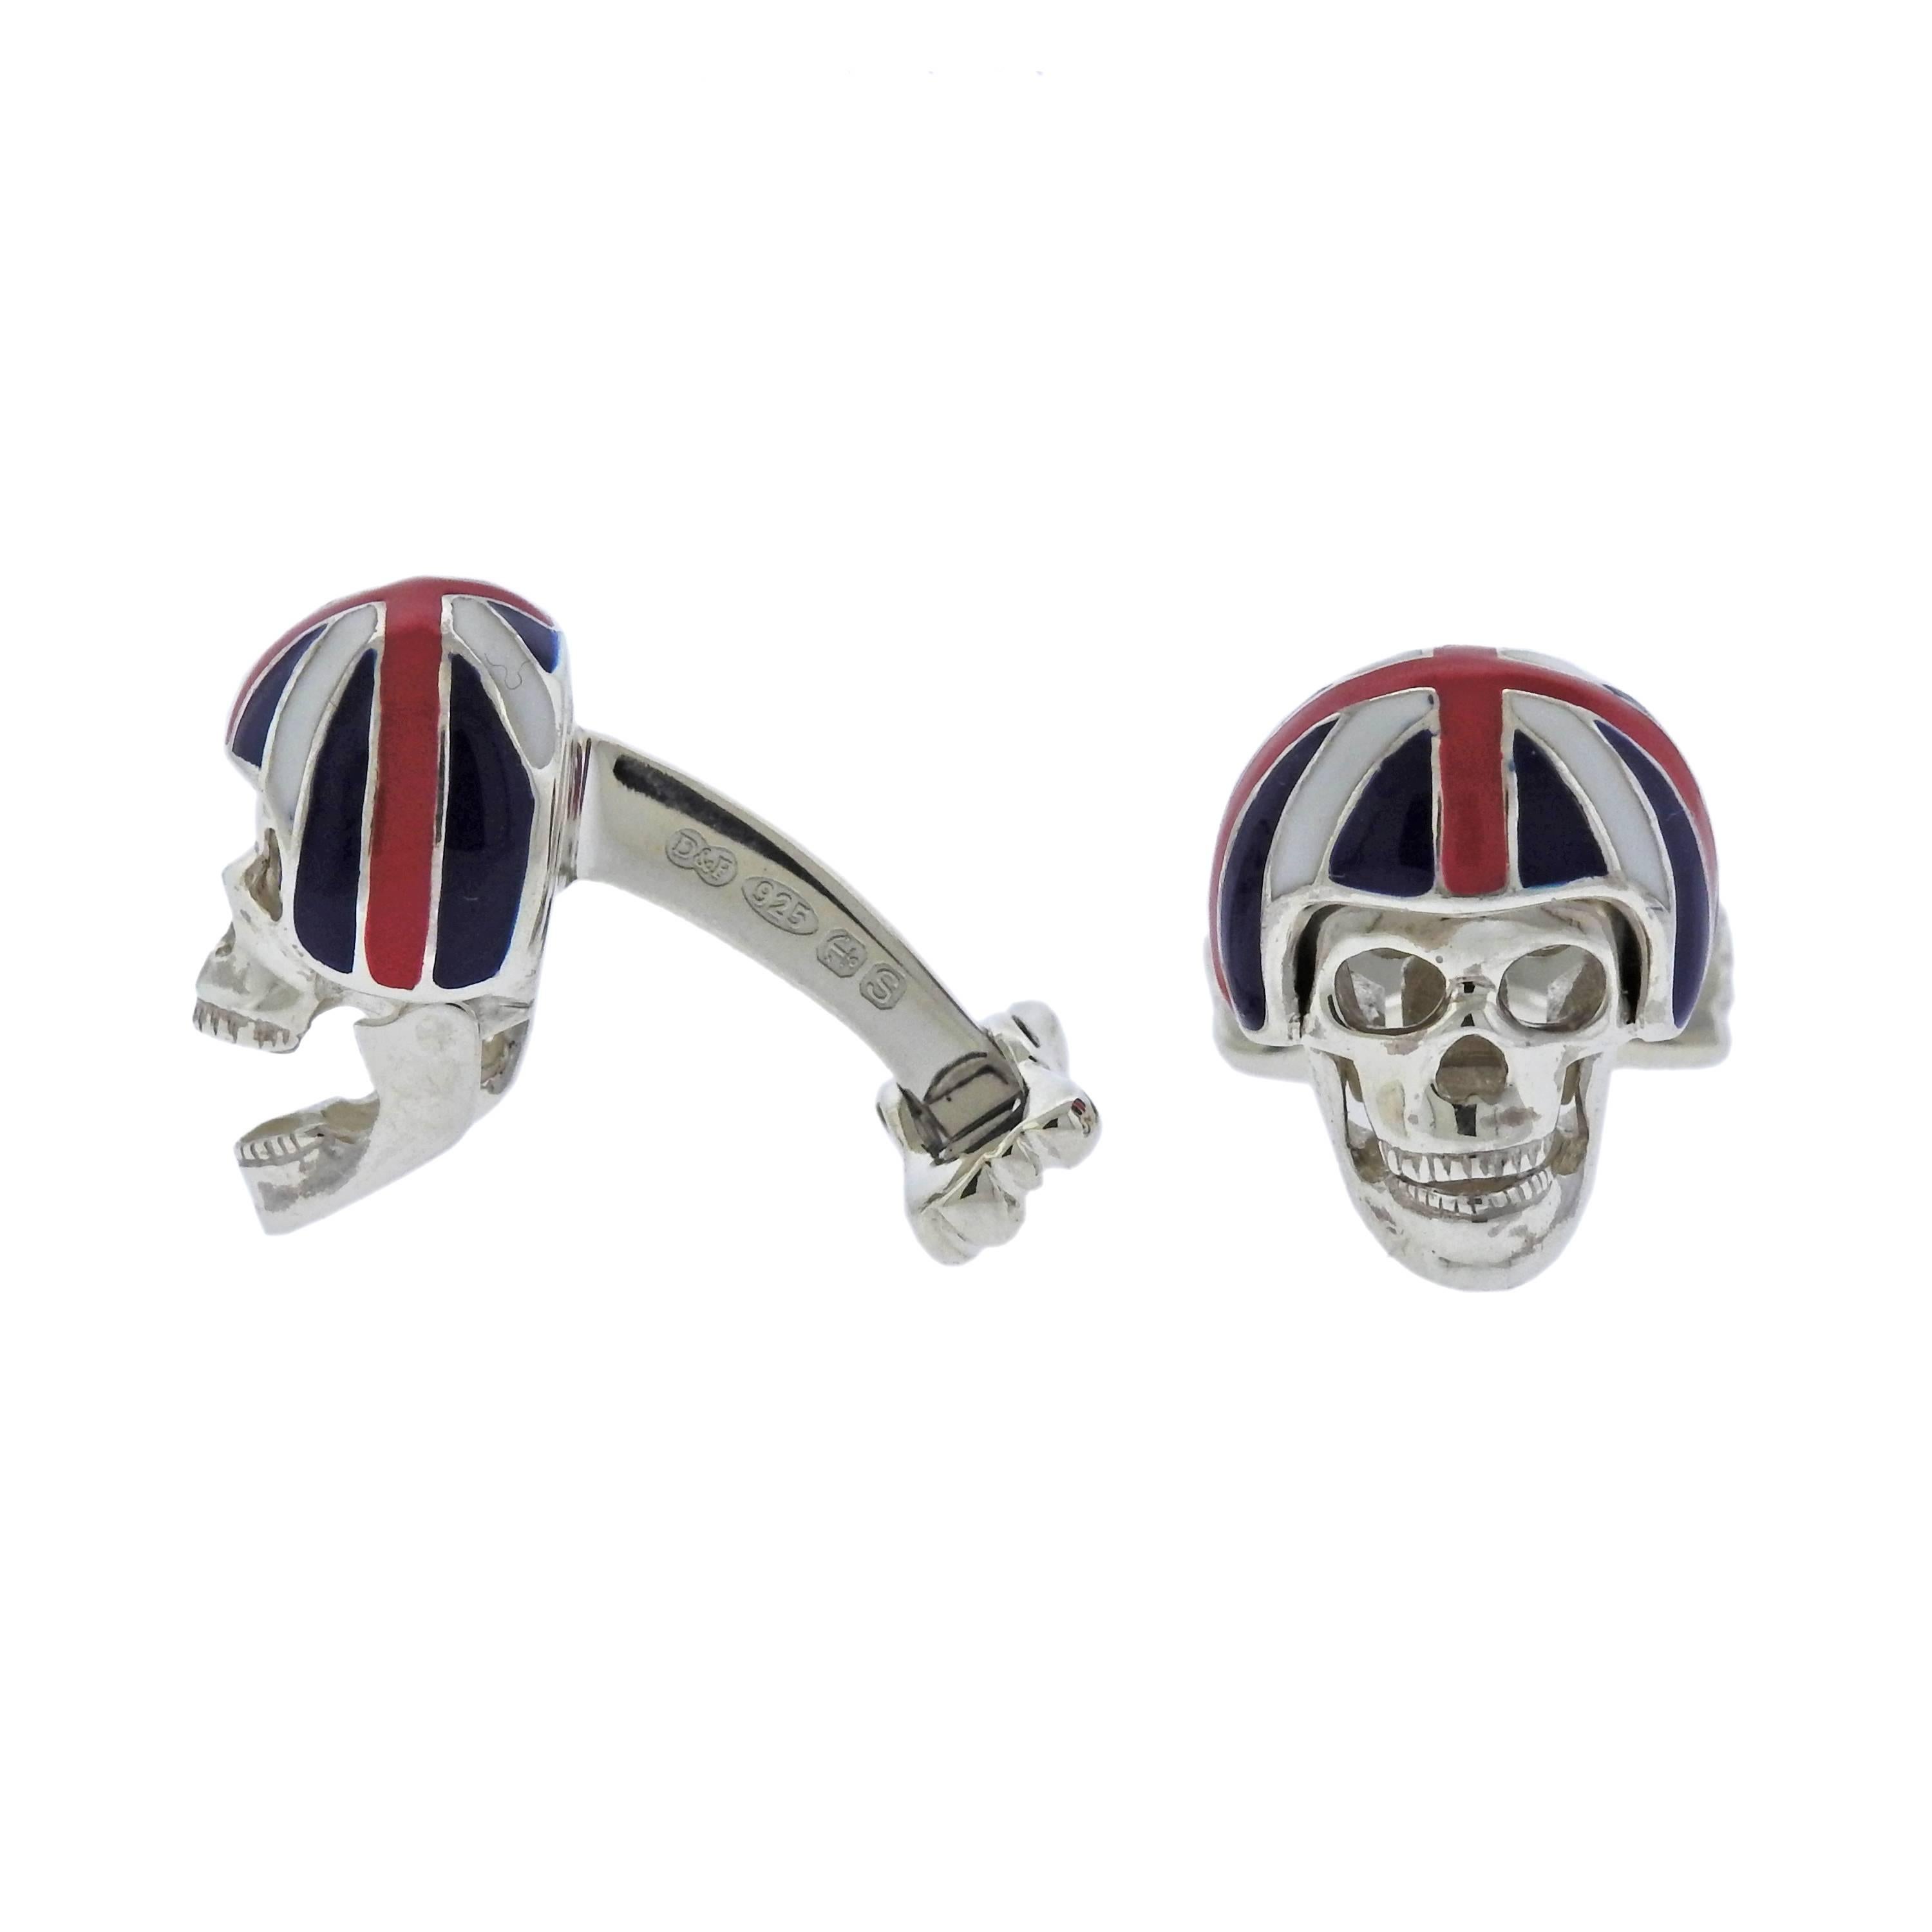  Pair of new sterling silver skull cufflinks, crafted by Deakin & Francis, featuring signature movable jaws, revealing pink spinel eyes, with enamel Union Jack helmets.  Come with box and papers.  Each cufflink measures 20mm x 15mm, weigh 23